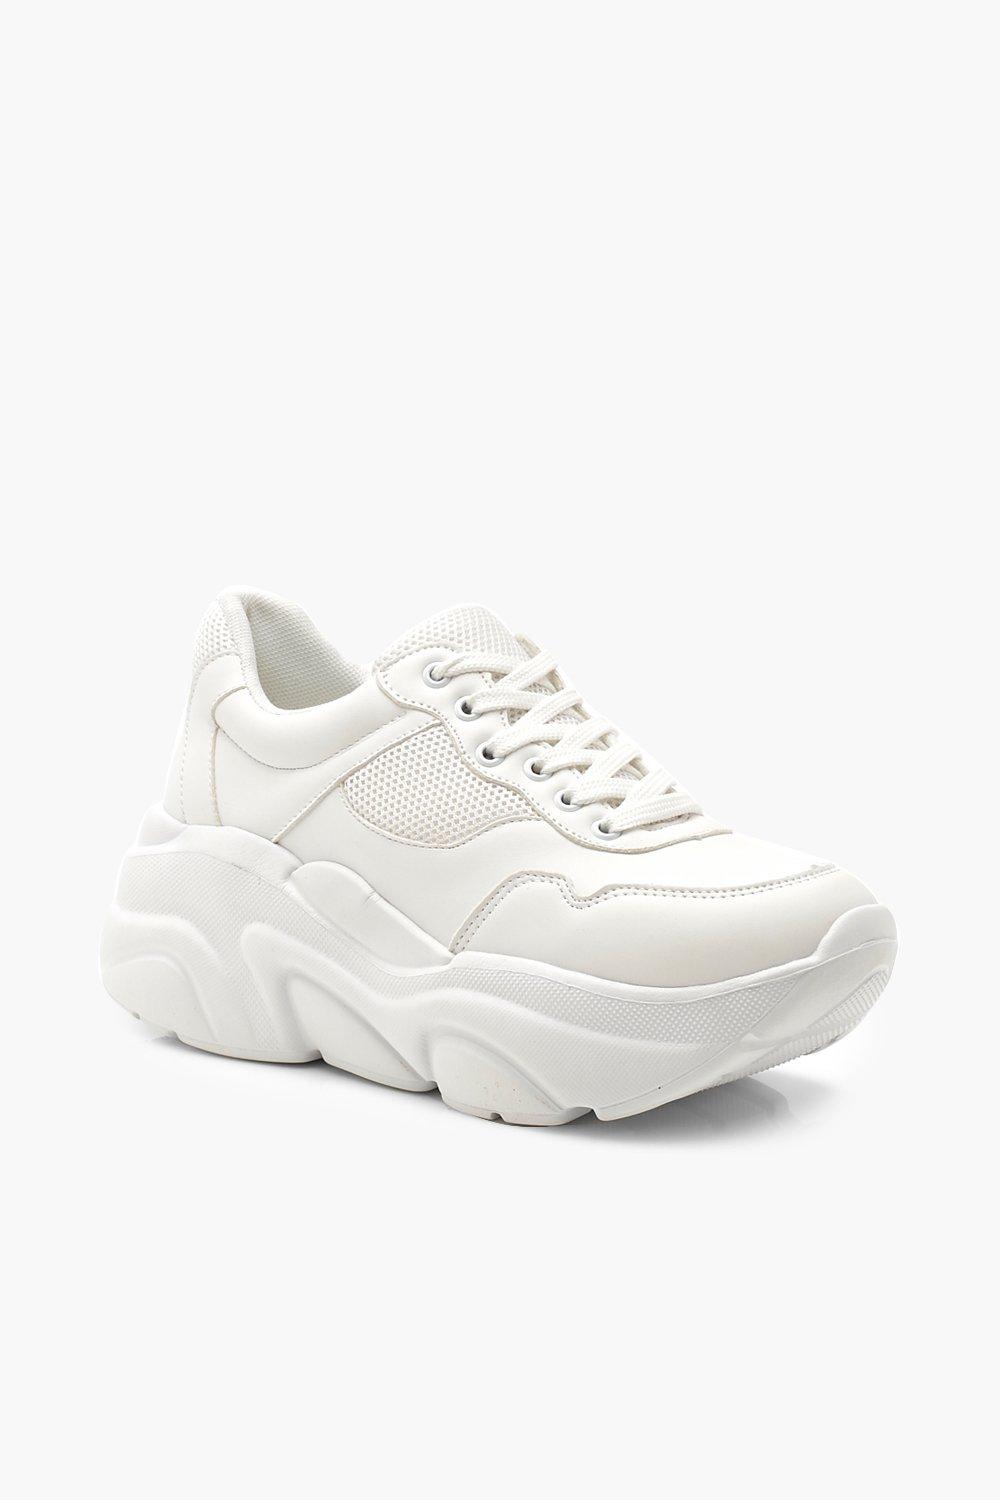 white lace up tennis shoes